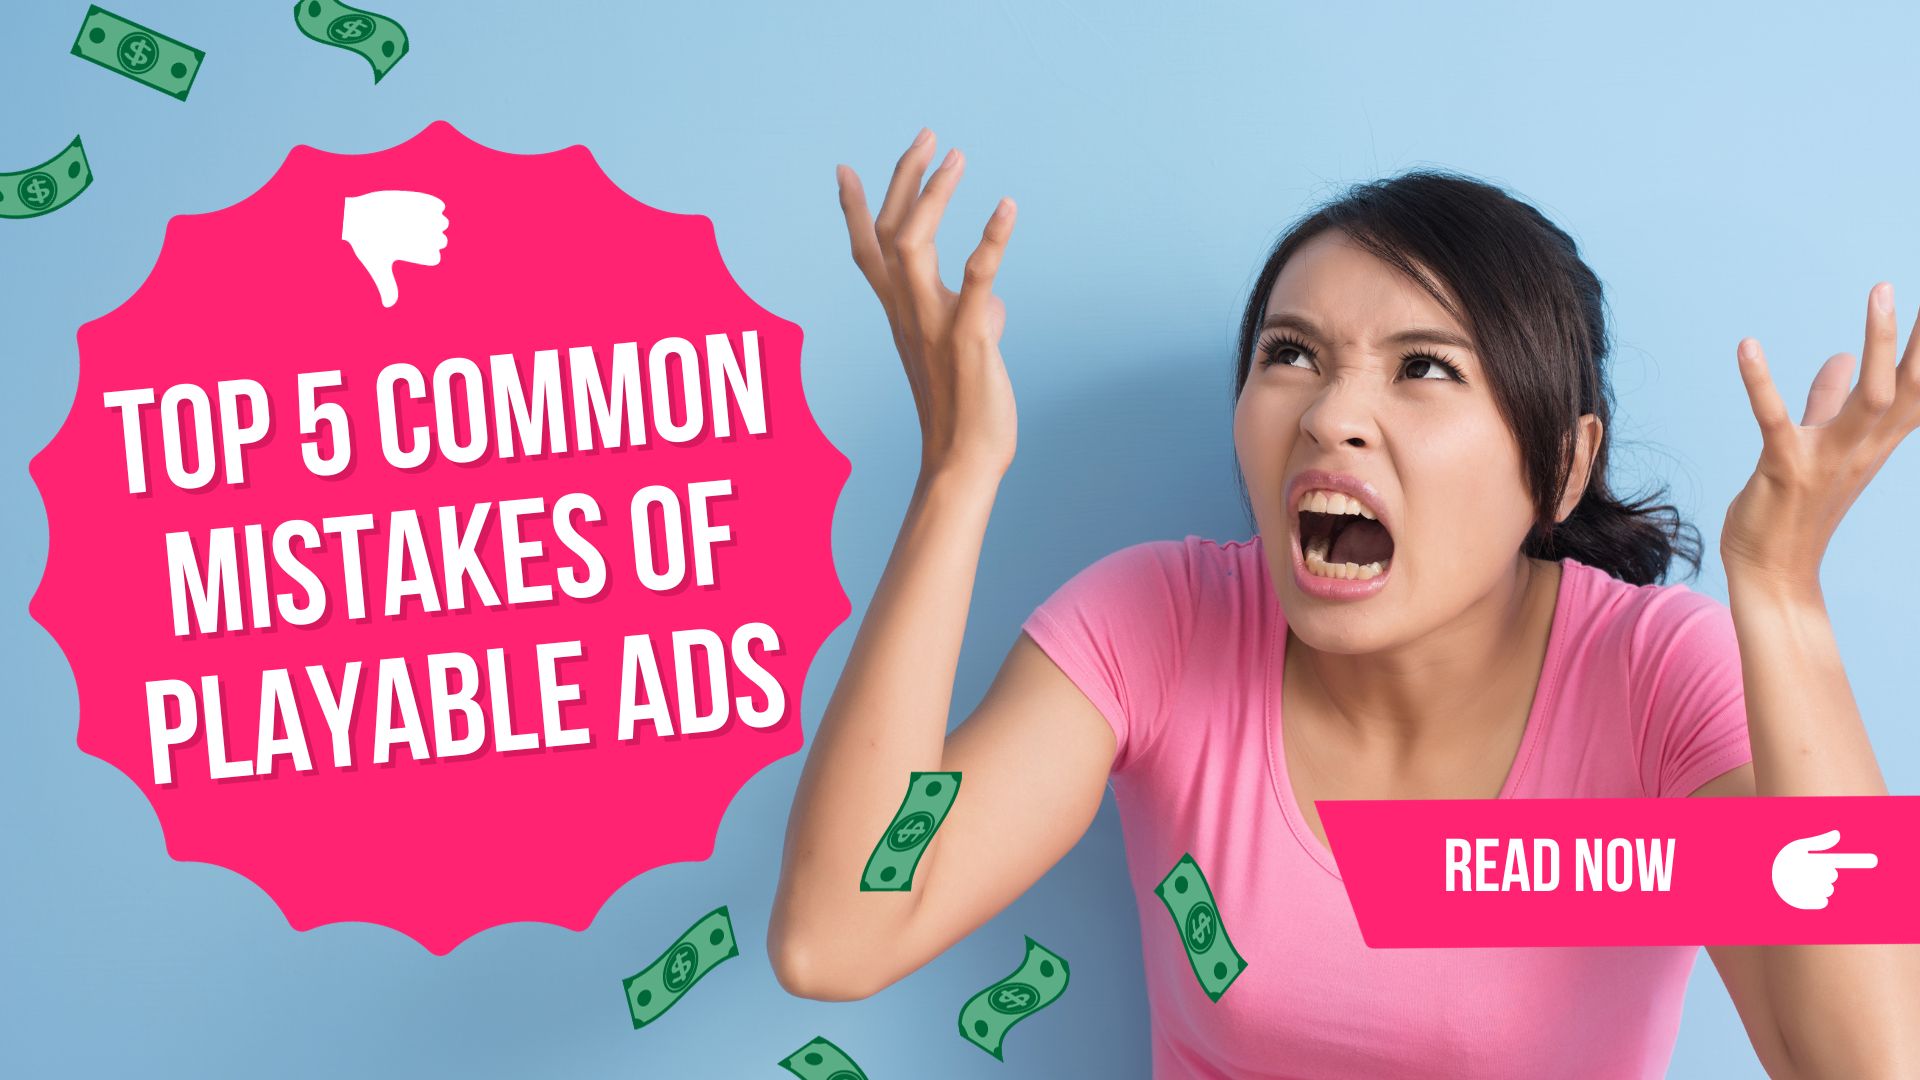 Top 5 Common Mistakes of Playable Ads